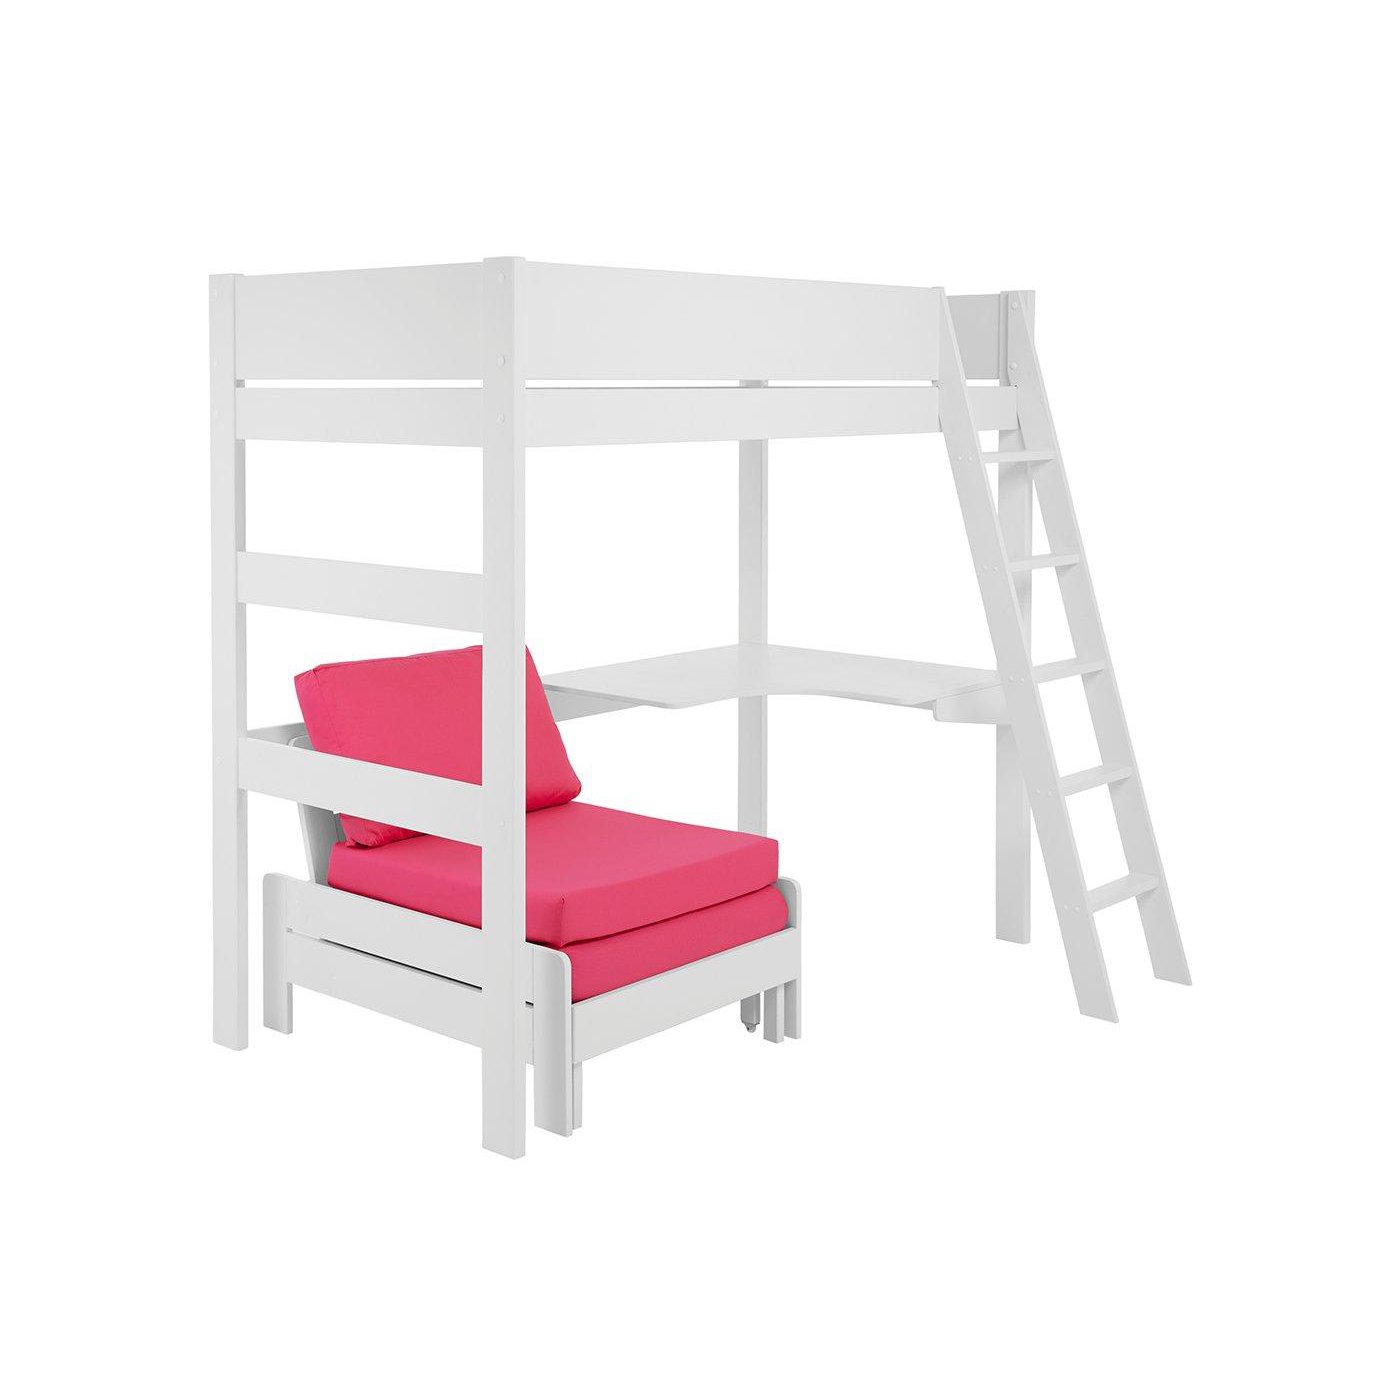 Anderson Desk High Sleeper With Pink Chair - 3'0 Single - White